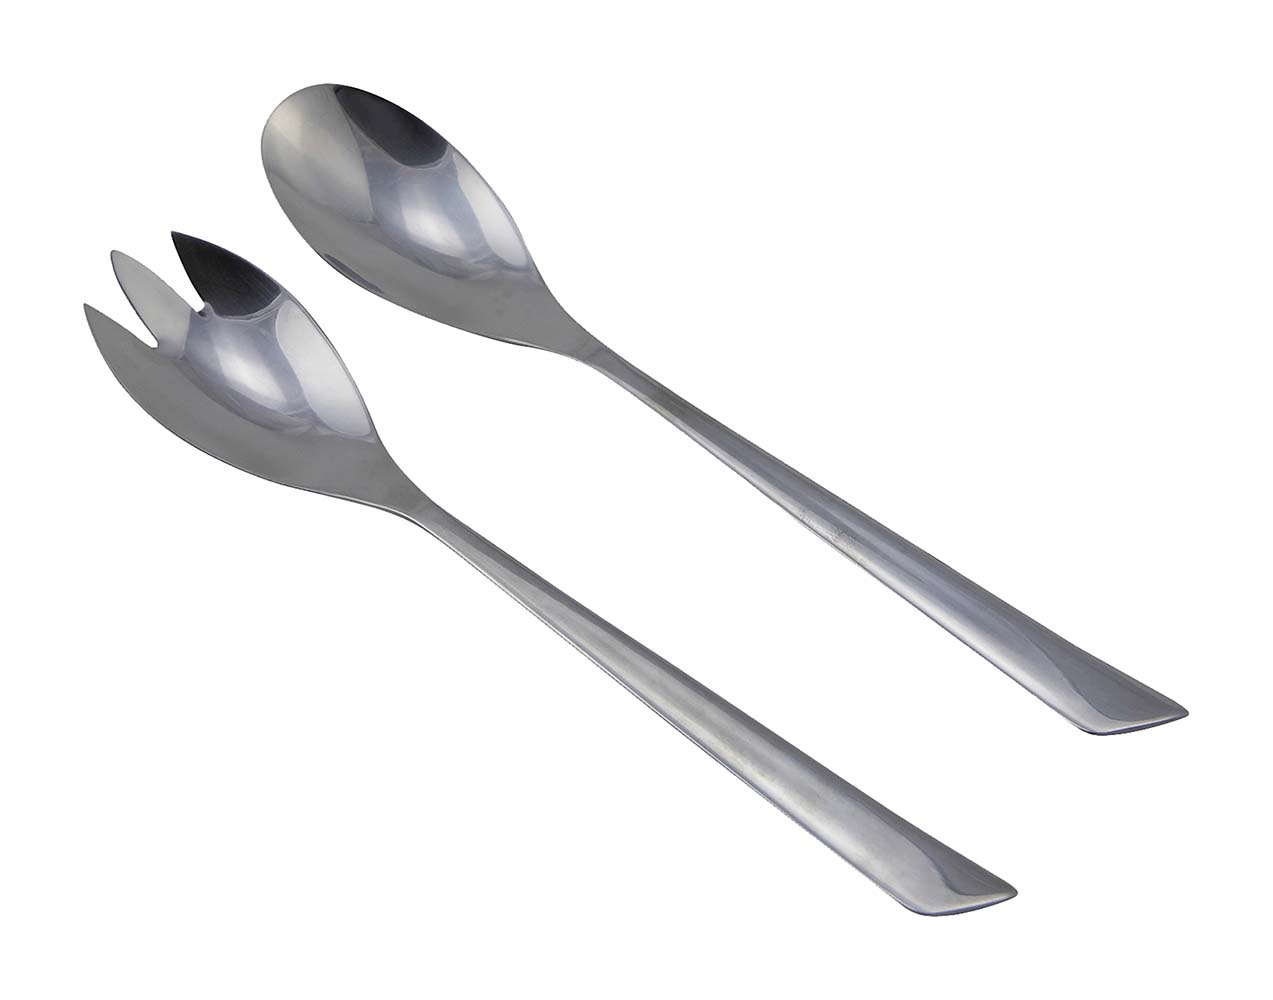 6102224 This silver salad cutlery gives your table a stylish look. The cutlery has a high-quality finish and is made of stainless steel. It is a 2-piece set and is dishwasher safe. Use this silver set for camping, at home or in the garden. Also the cutlery is easy to use!